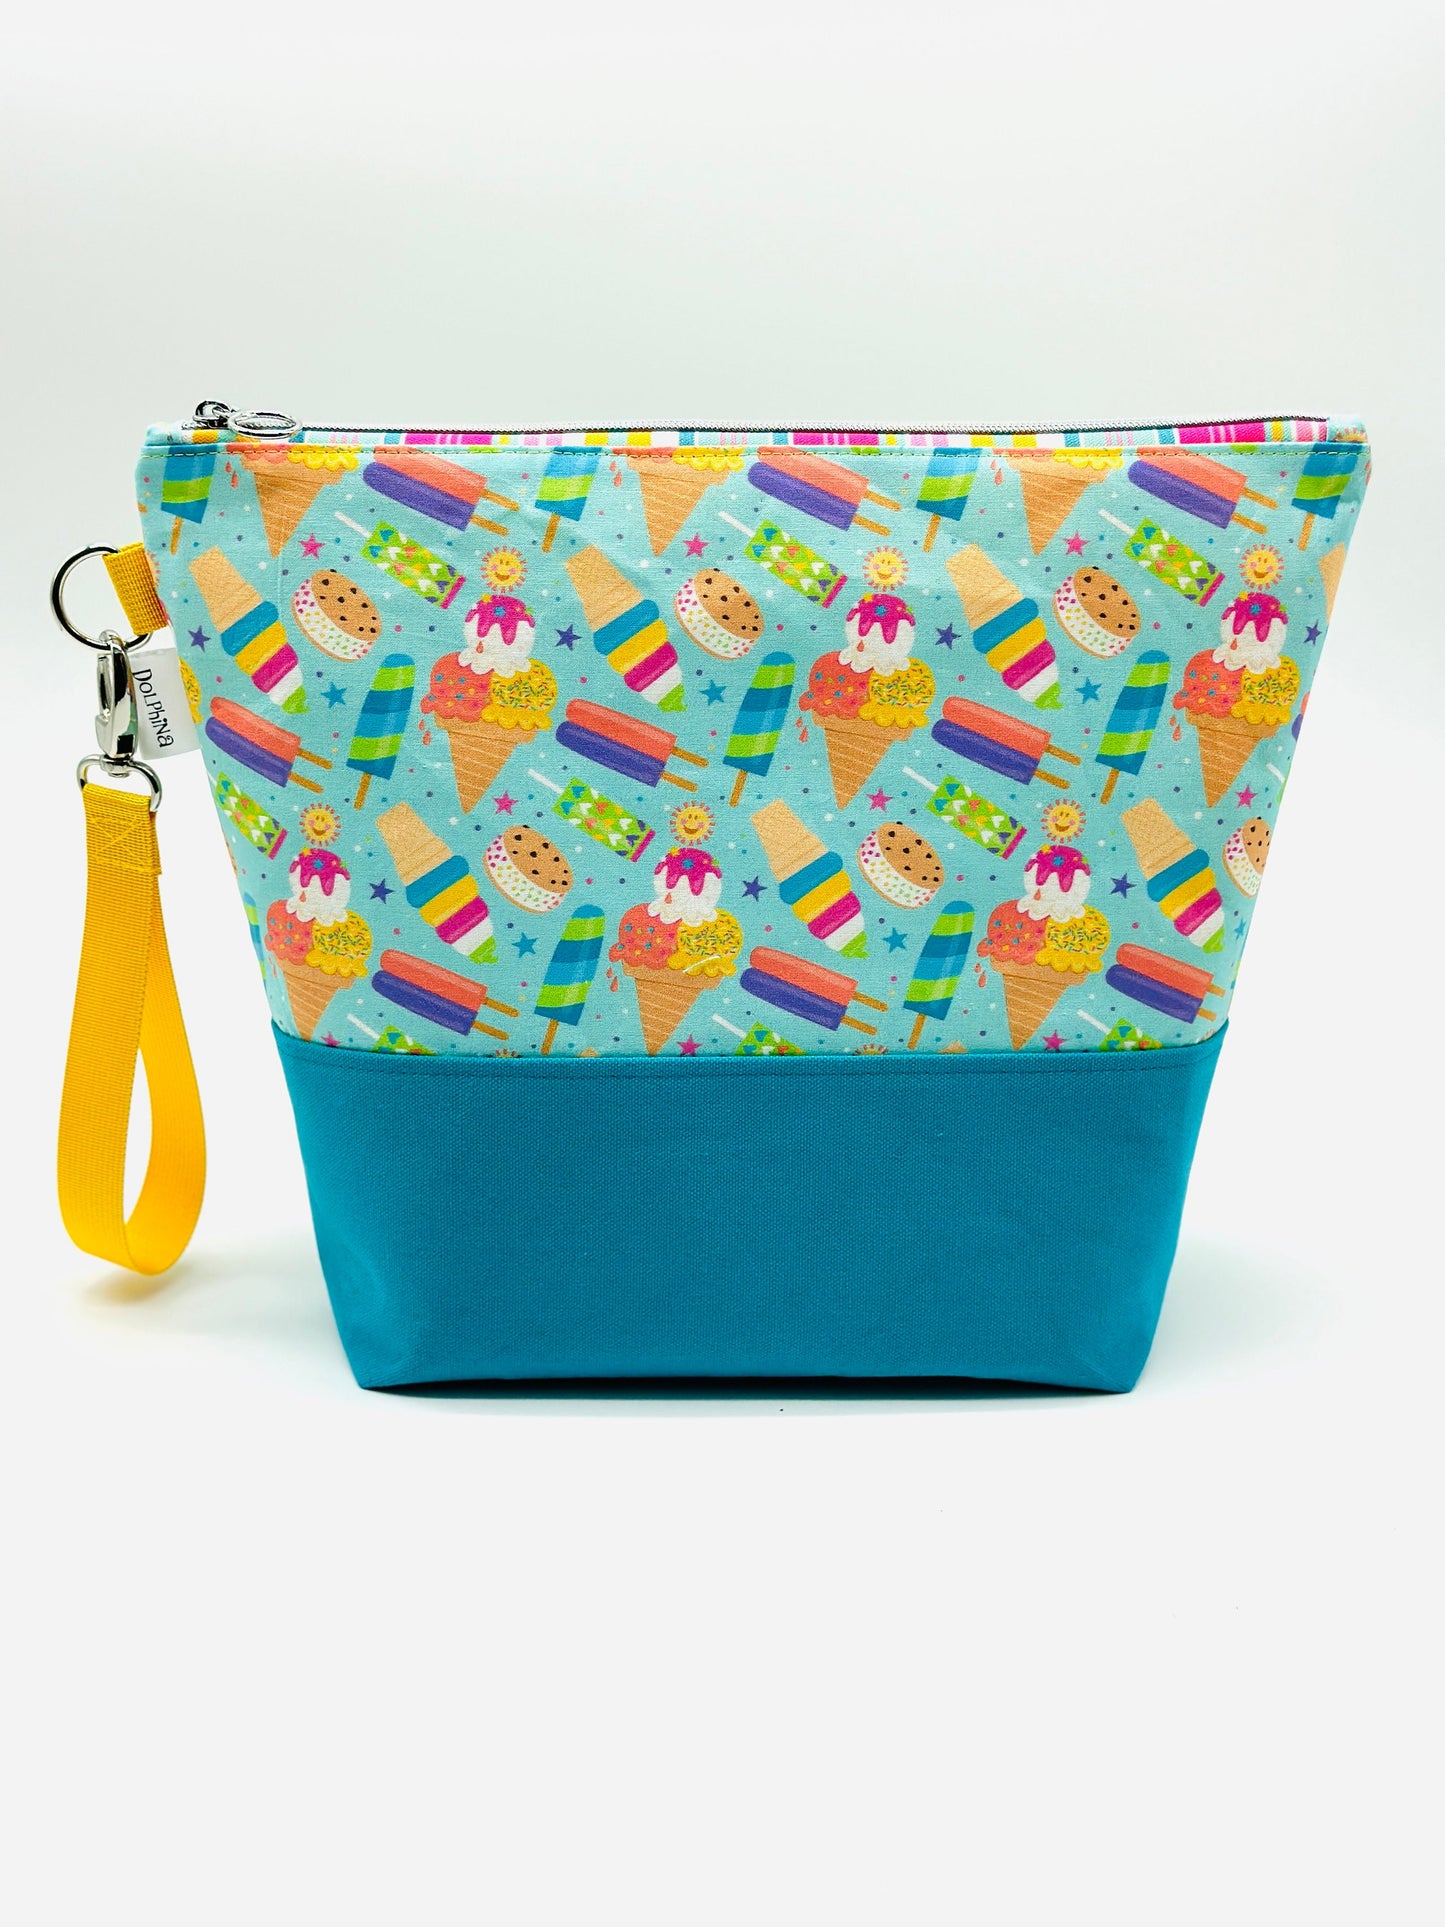 Extra large project bag - Colorful Ice Cream